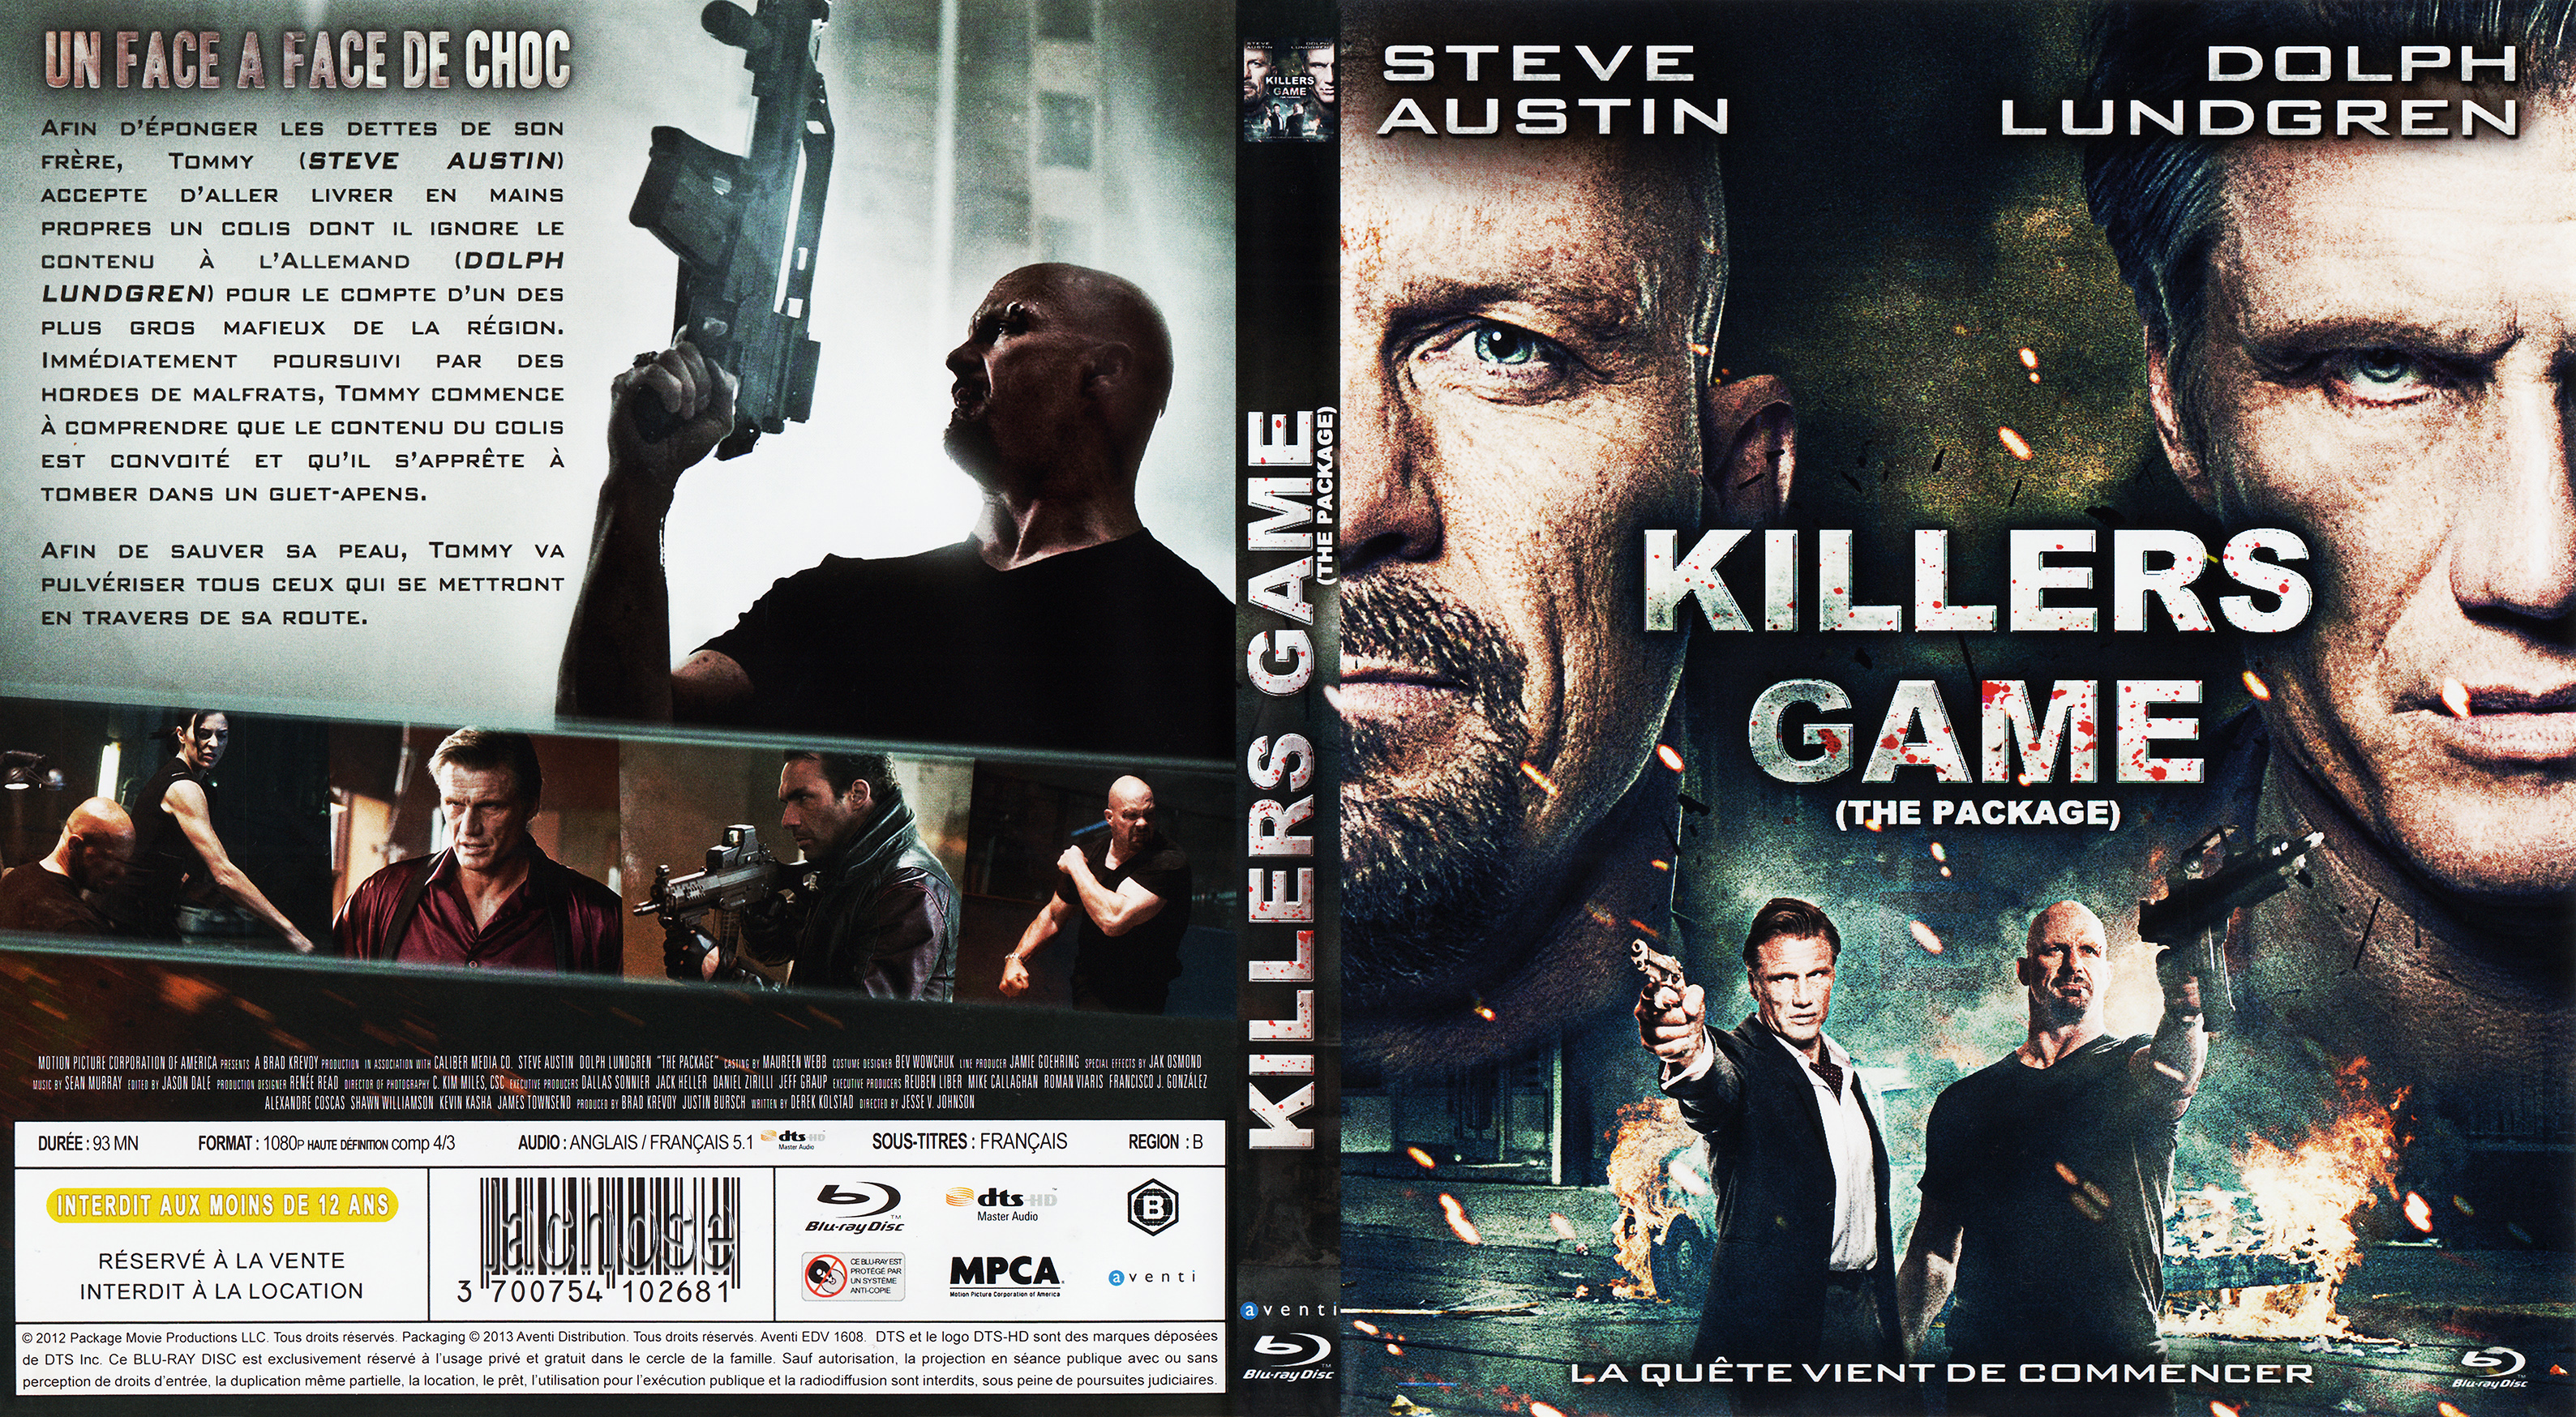 Jaquette DVD Killers game (BLU-RAY)